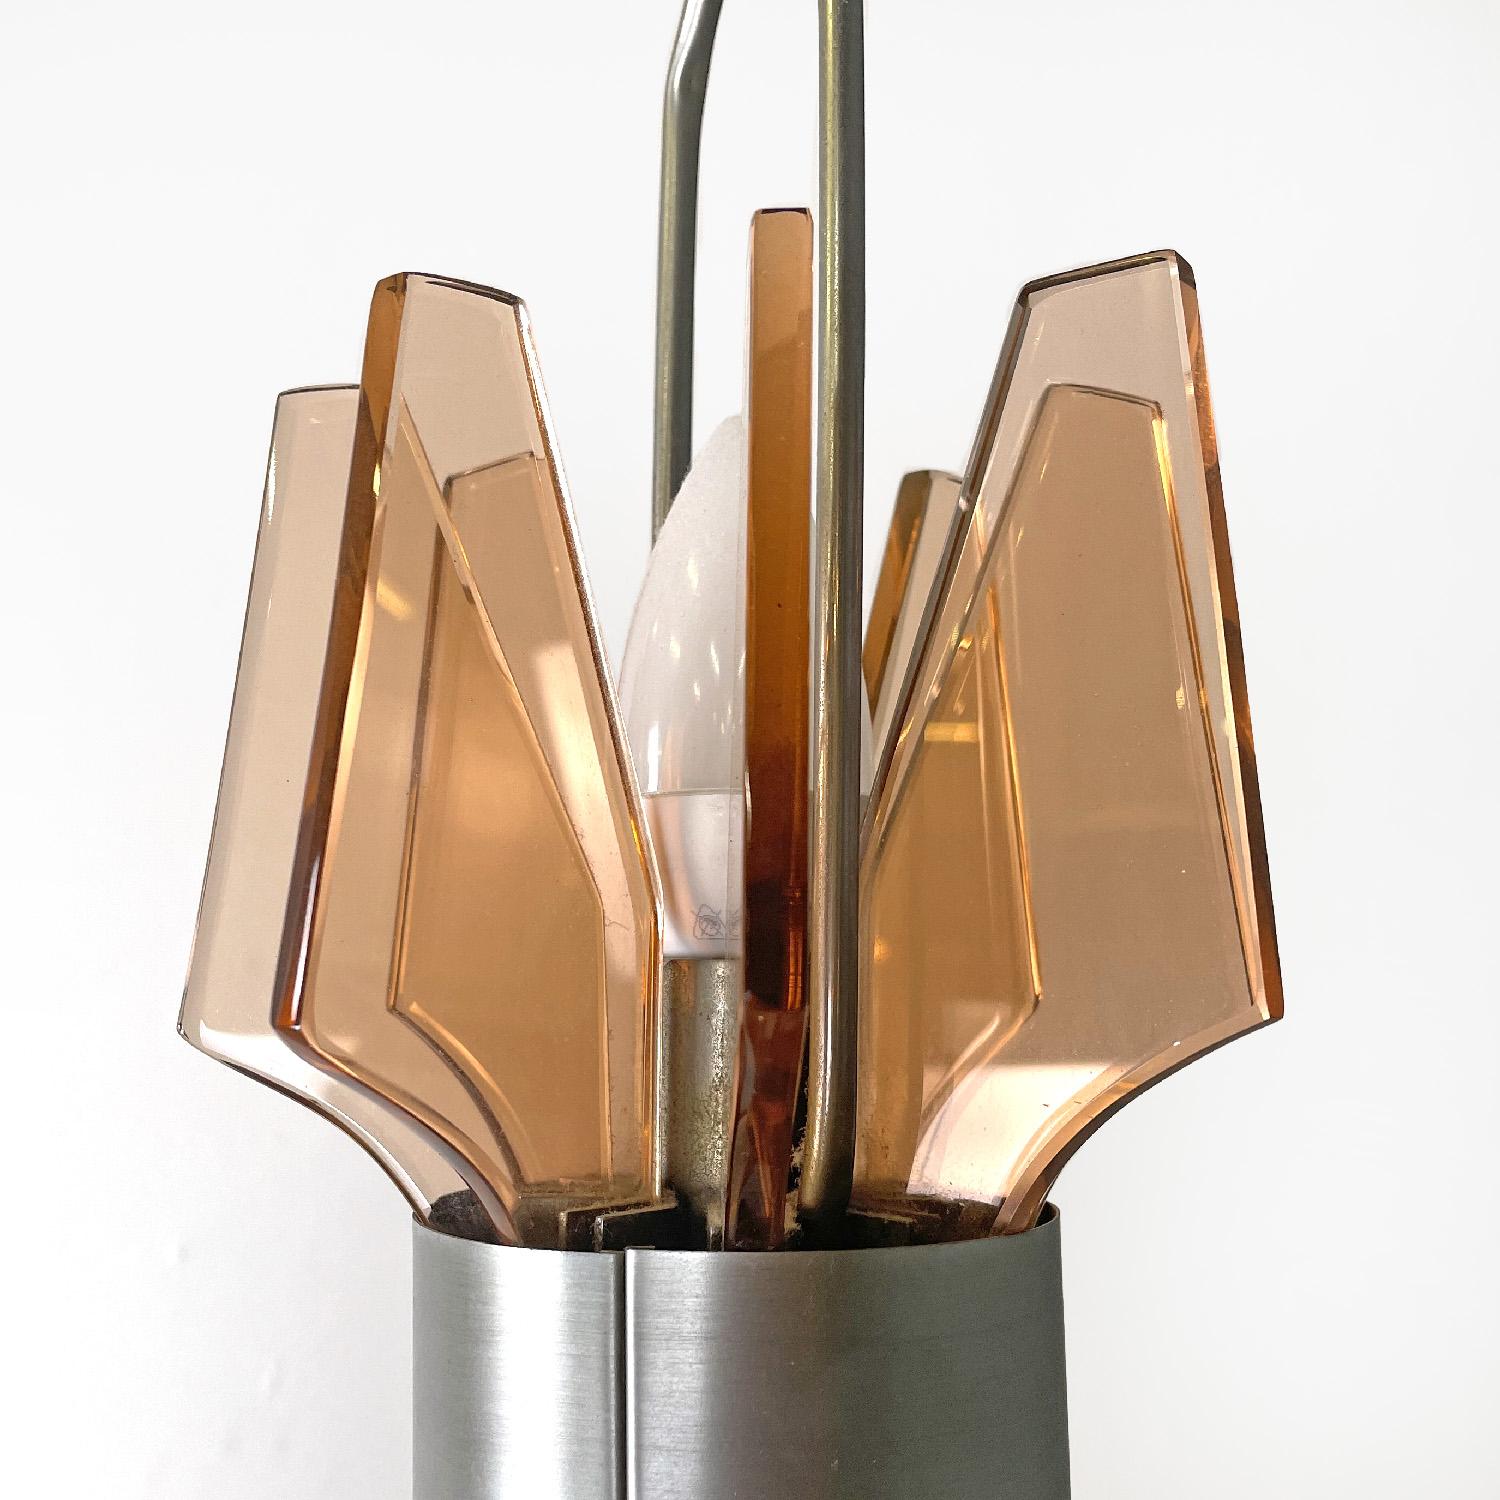 Italian mid-century modern chandelier in peach pink glass and metal, 1960s For Sale 5